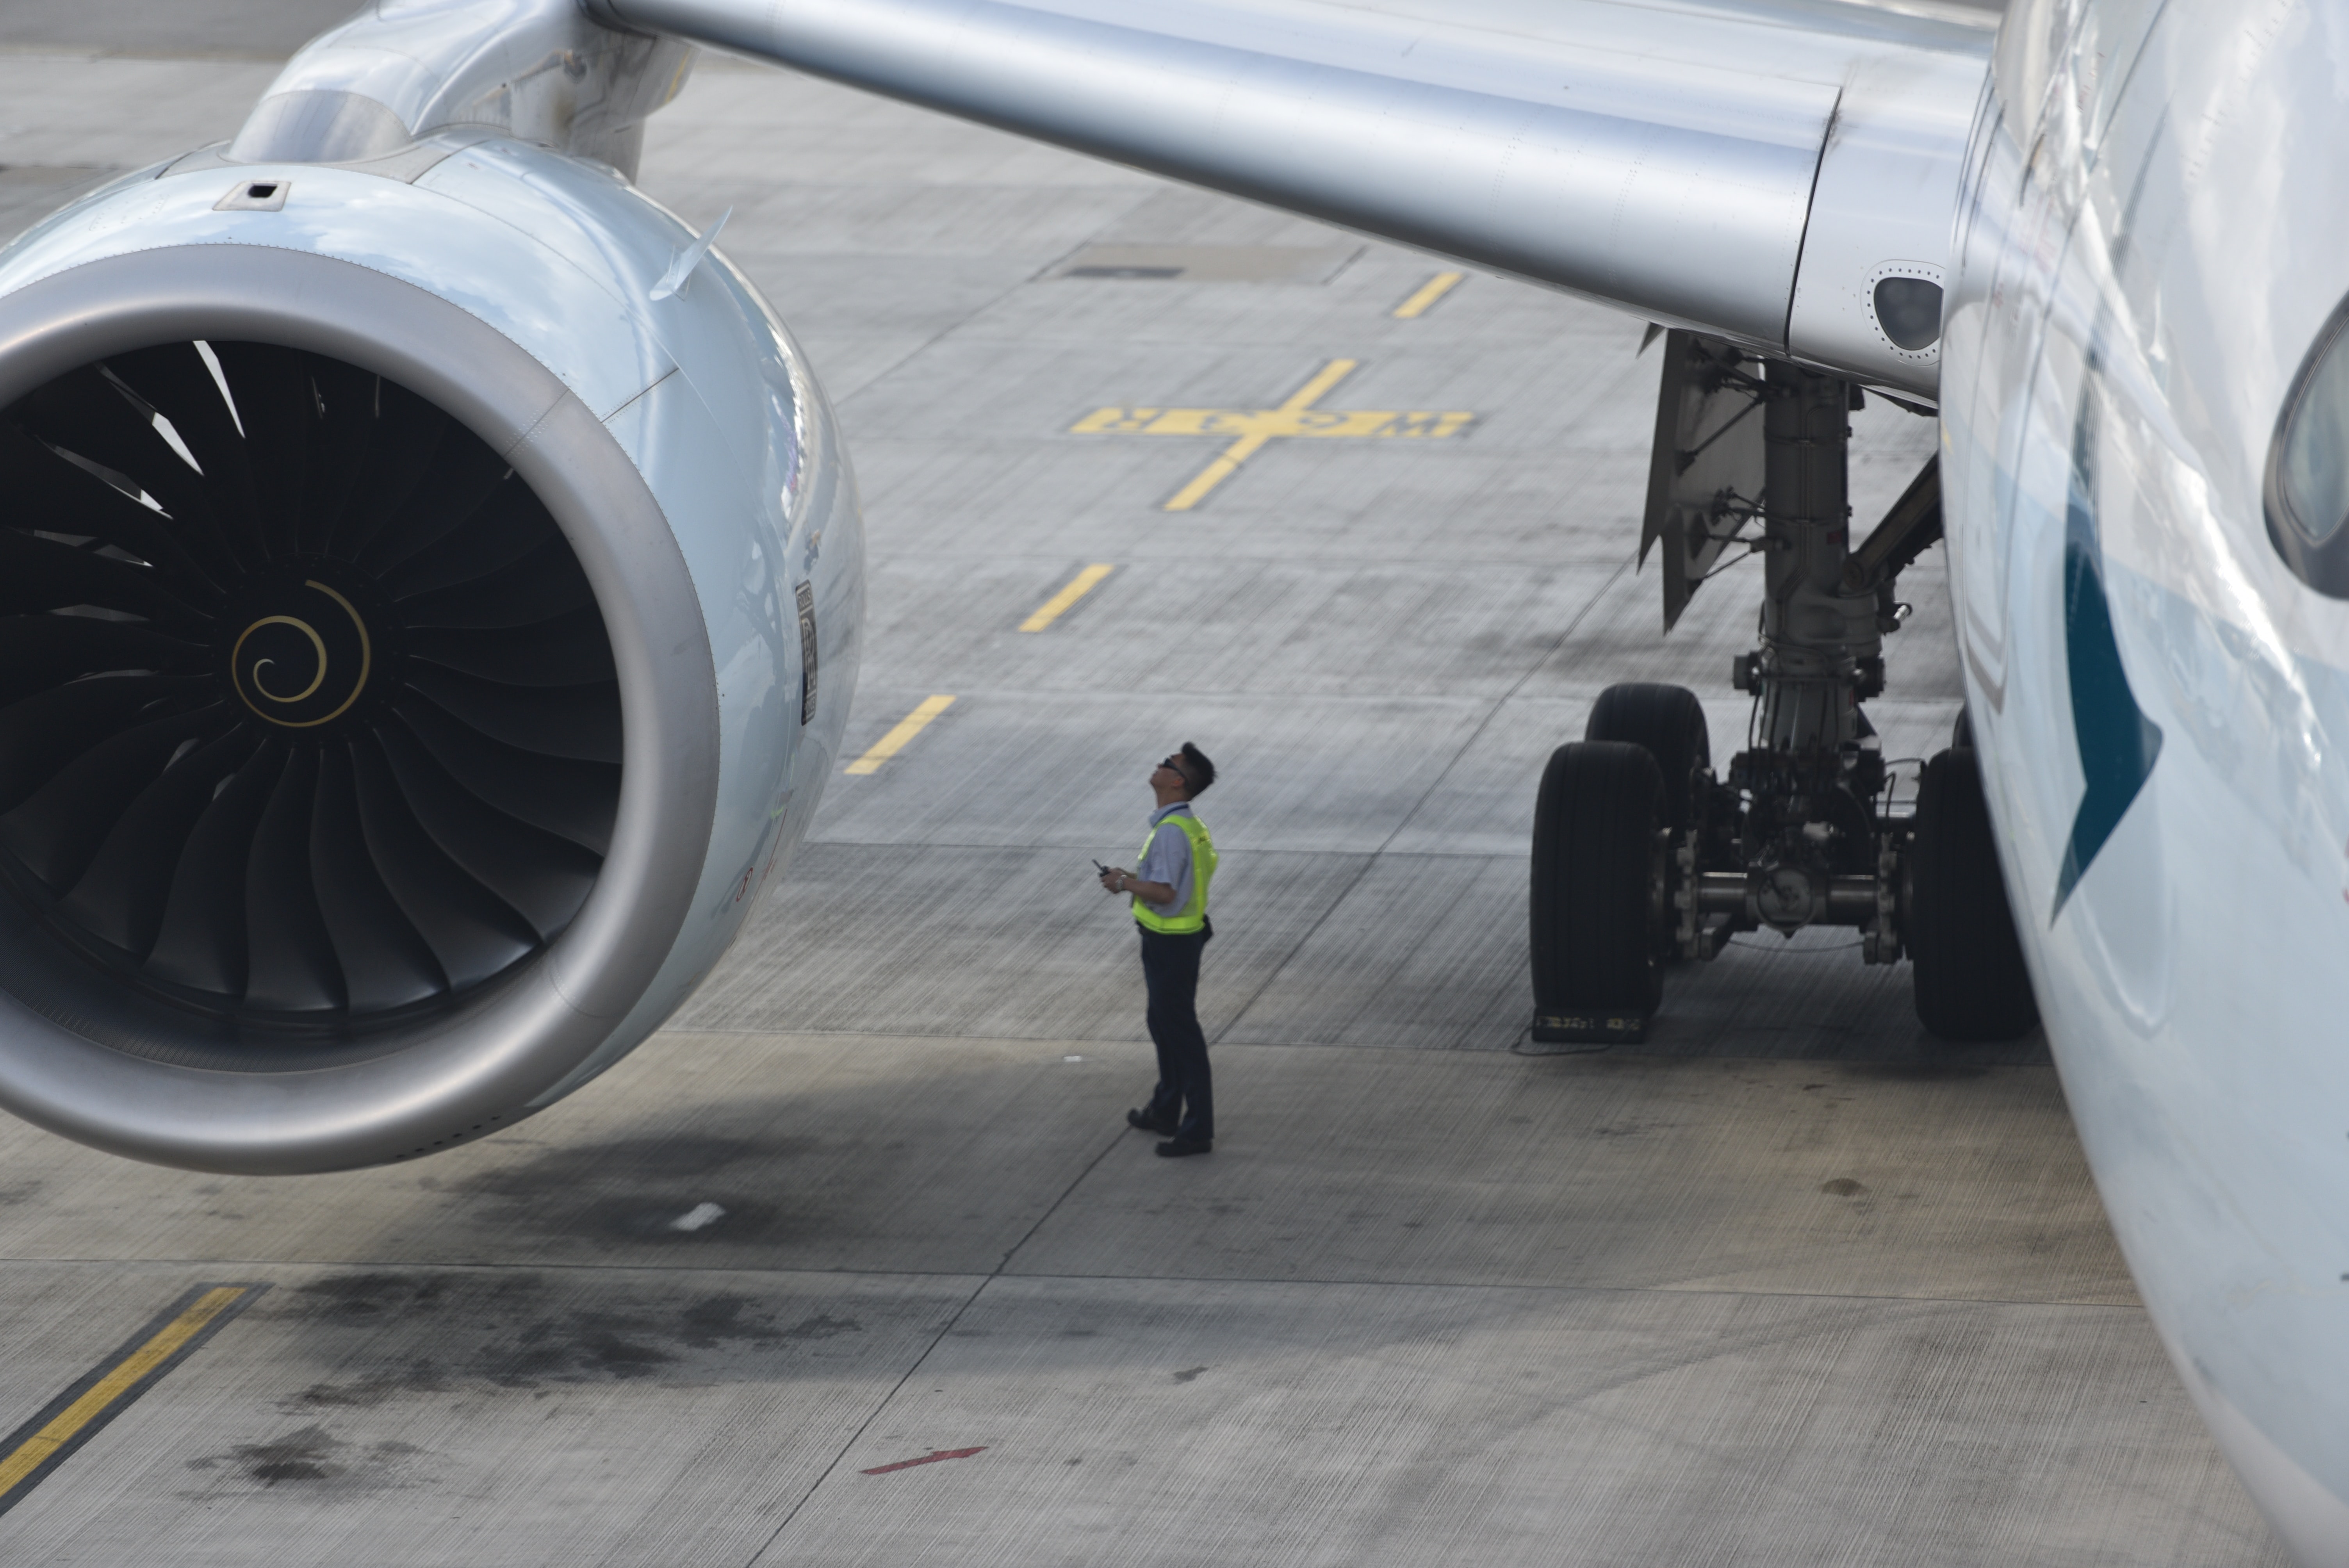 An aircraft mechanic inspecting the engine and wing of an aircraft at an airport. 